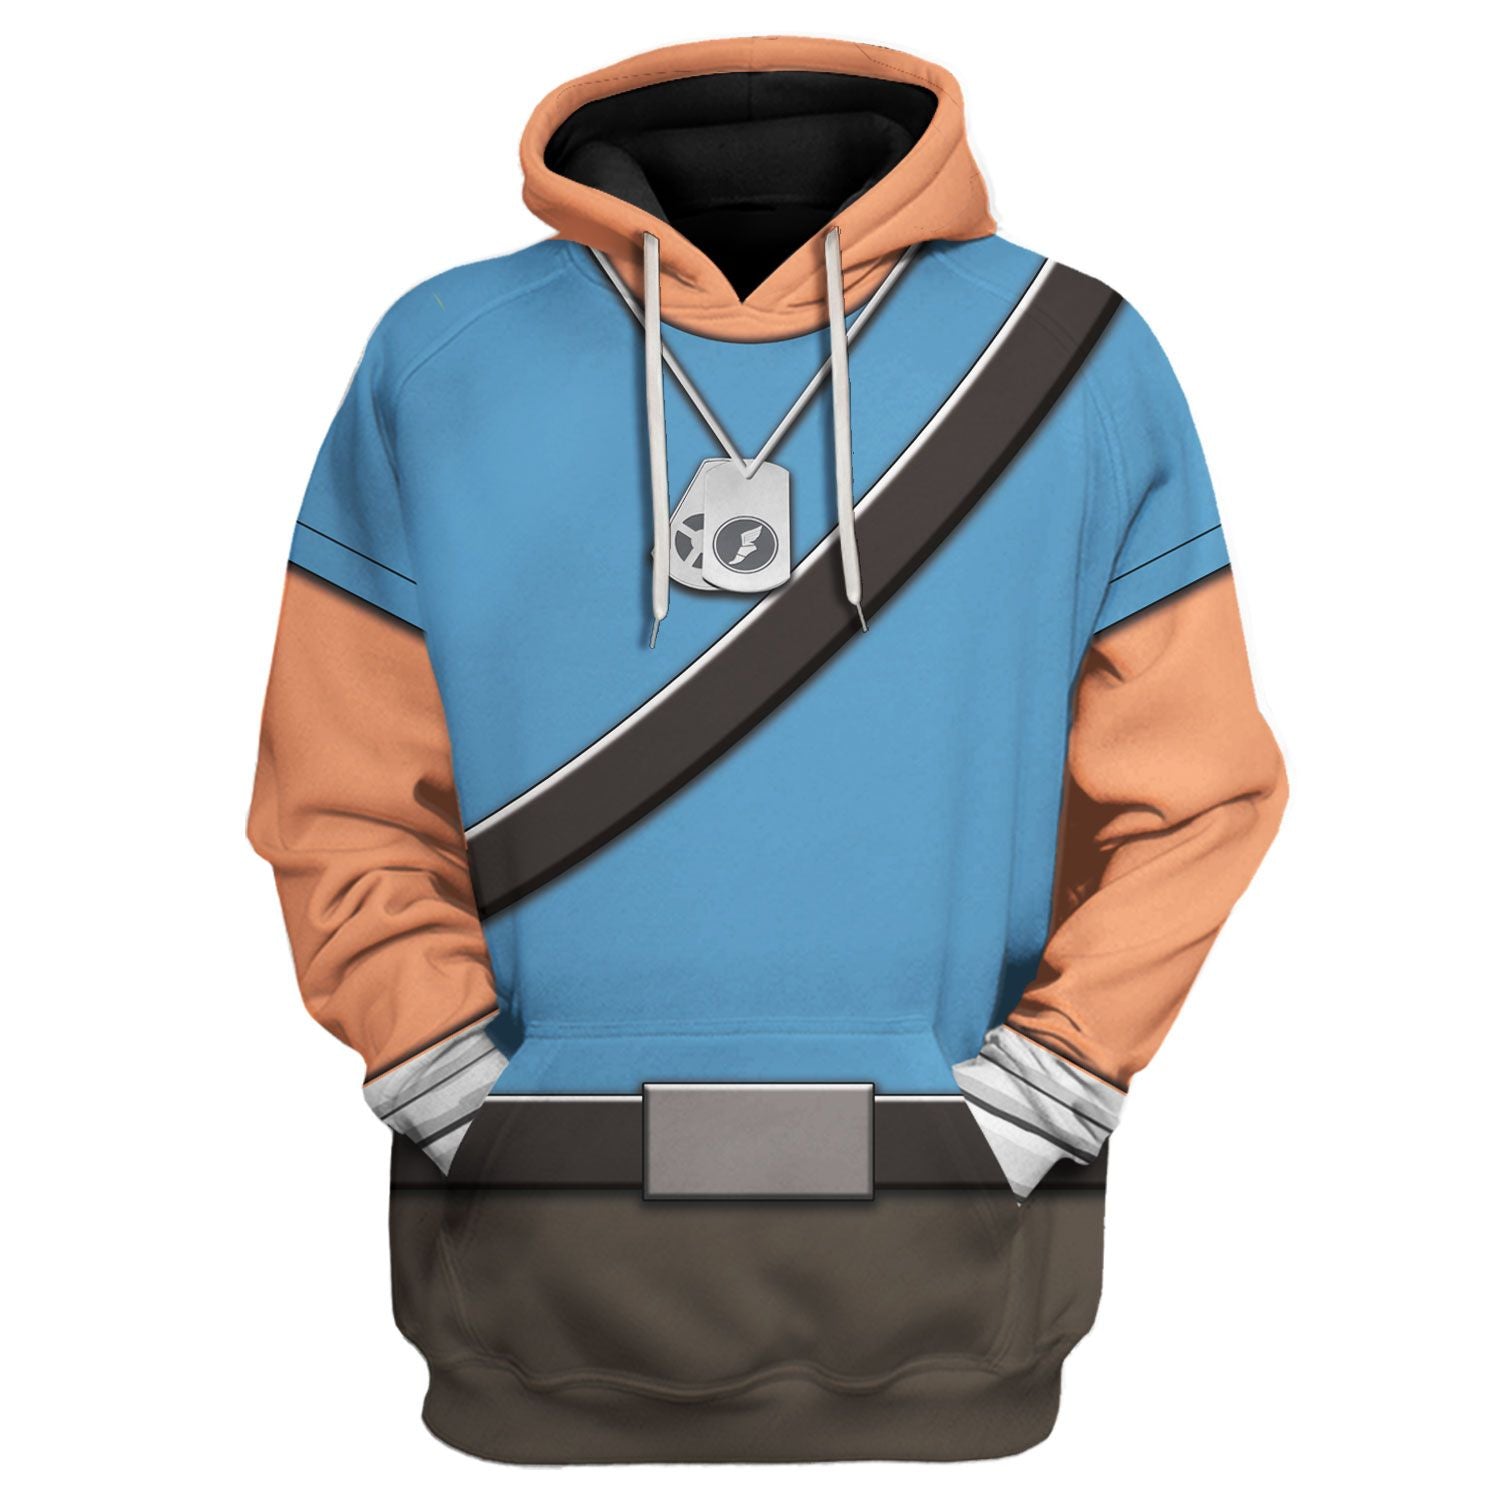 Scout Blue Team TF2 hoodie